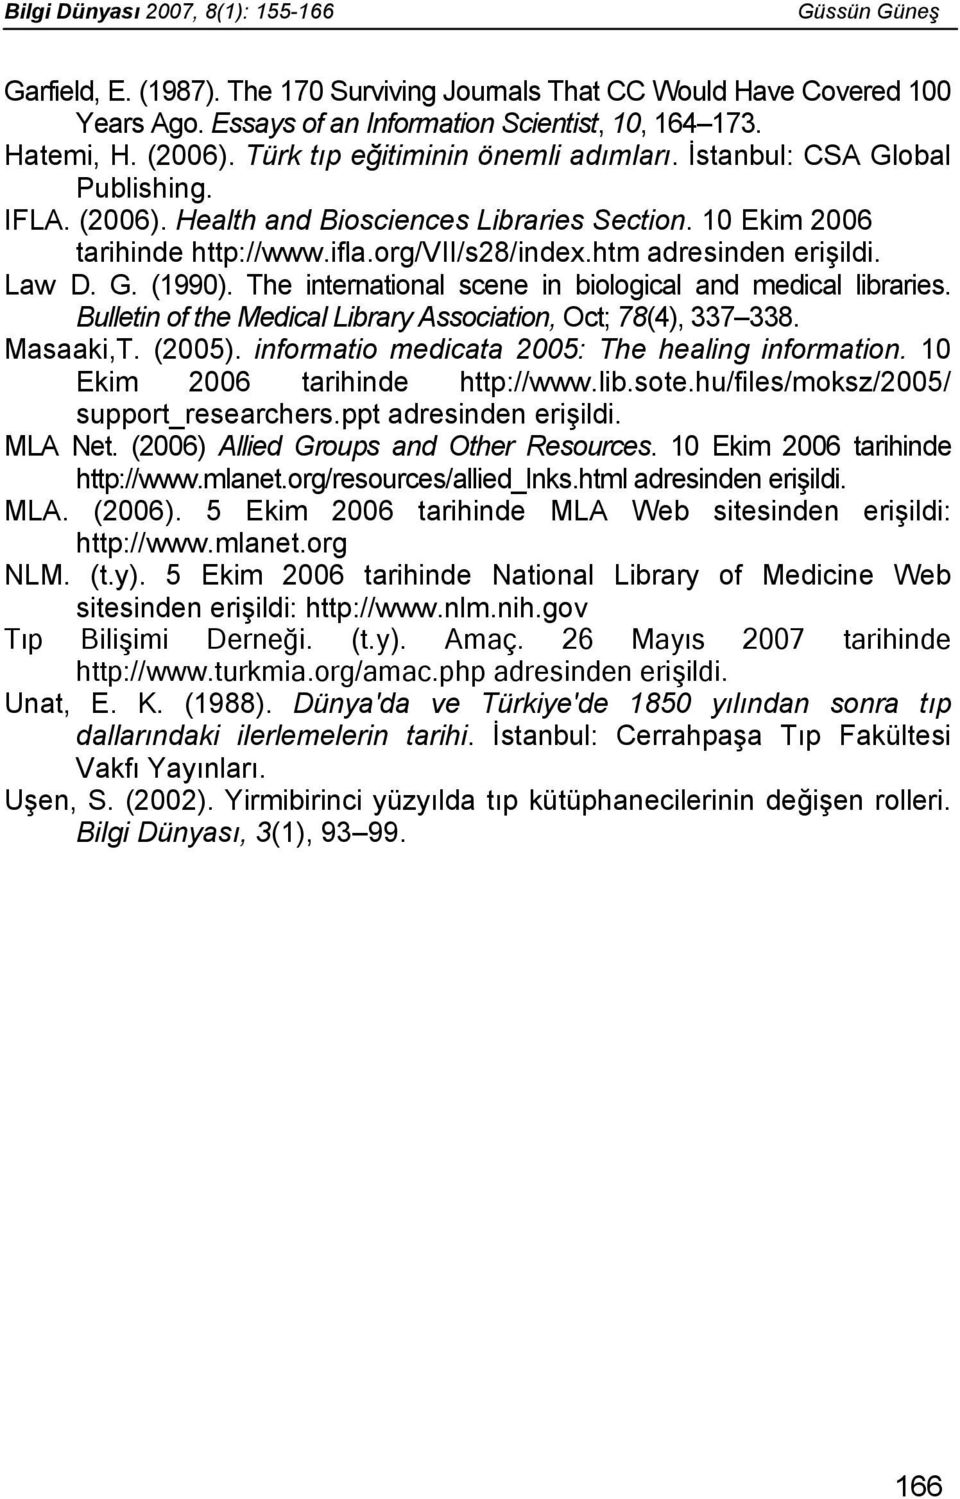 htm adresinden erişildi. Law D. G. (1990). The international scene in biological and medical libraries. Bulletin of the Medical Library Association, Oct; 78(4), 337 338. Masaaki,T. (2005).